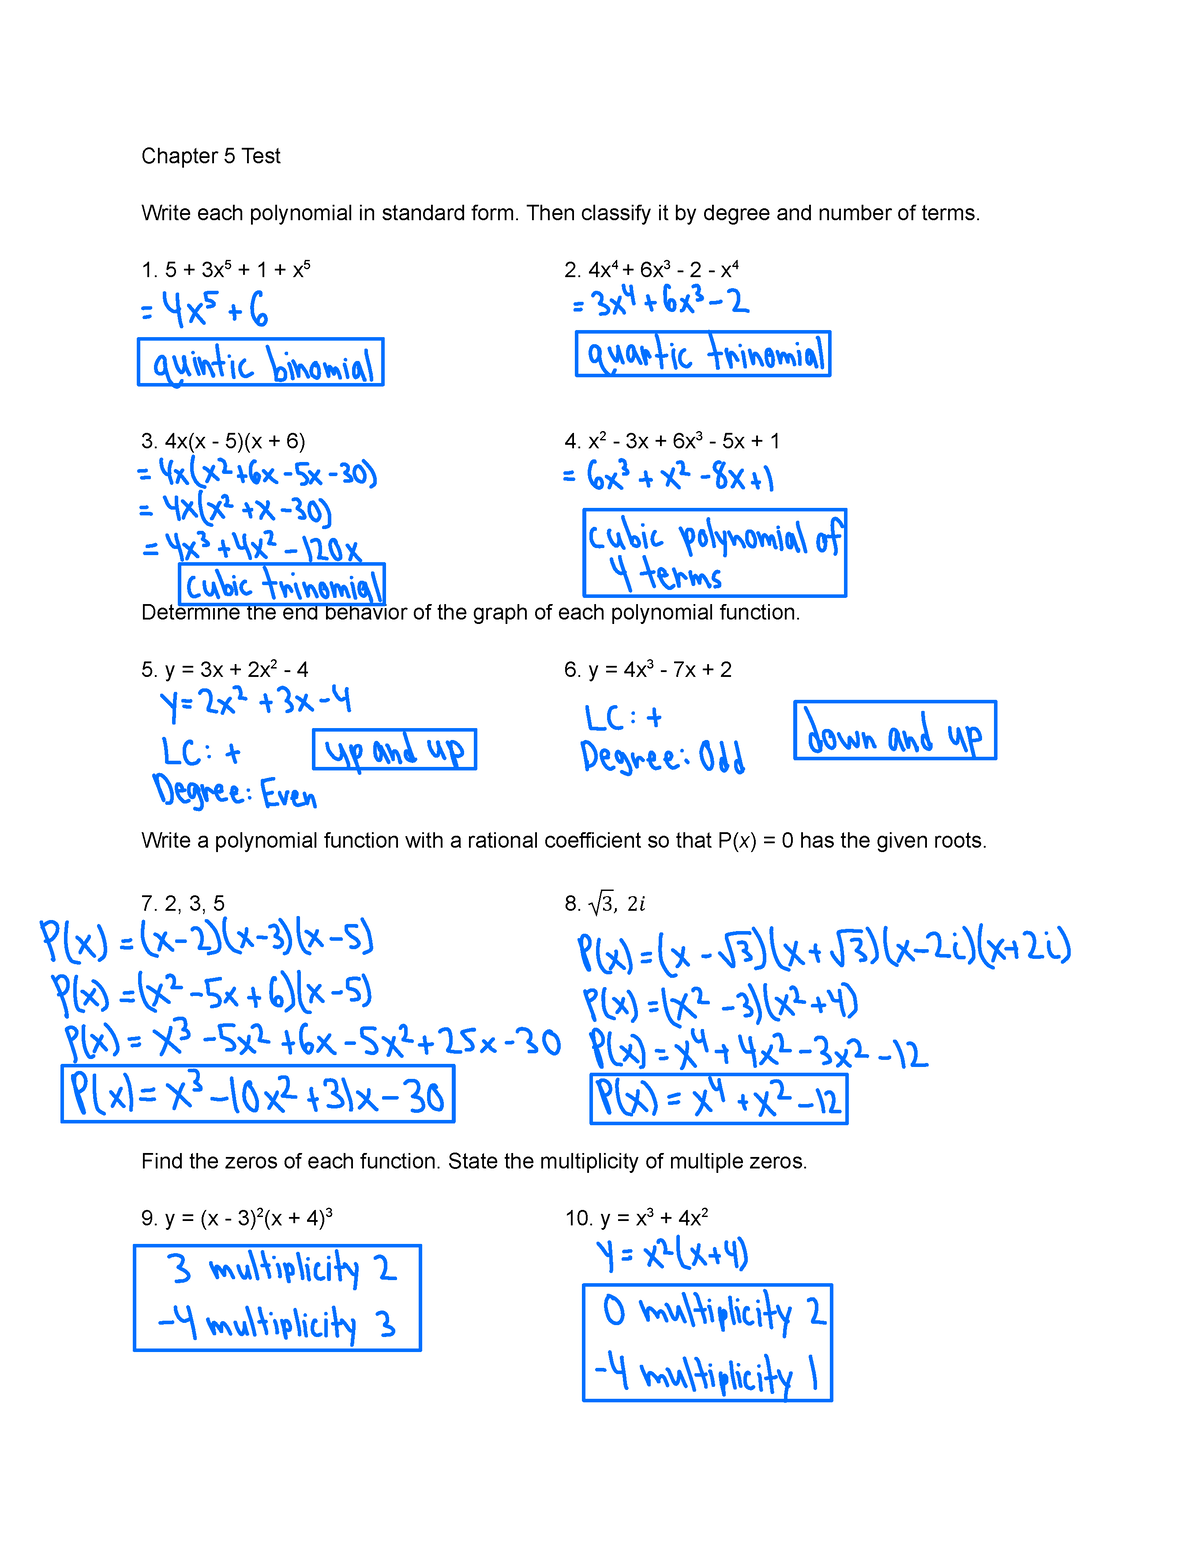 Write Each Polynomial In Standard Form And Classify The Polynomial By Degree